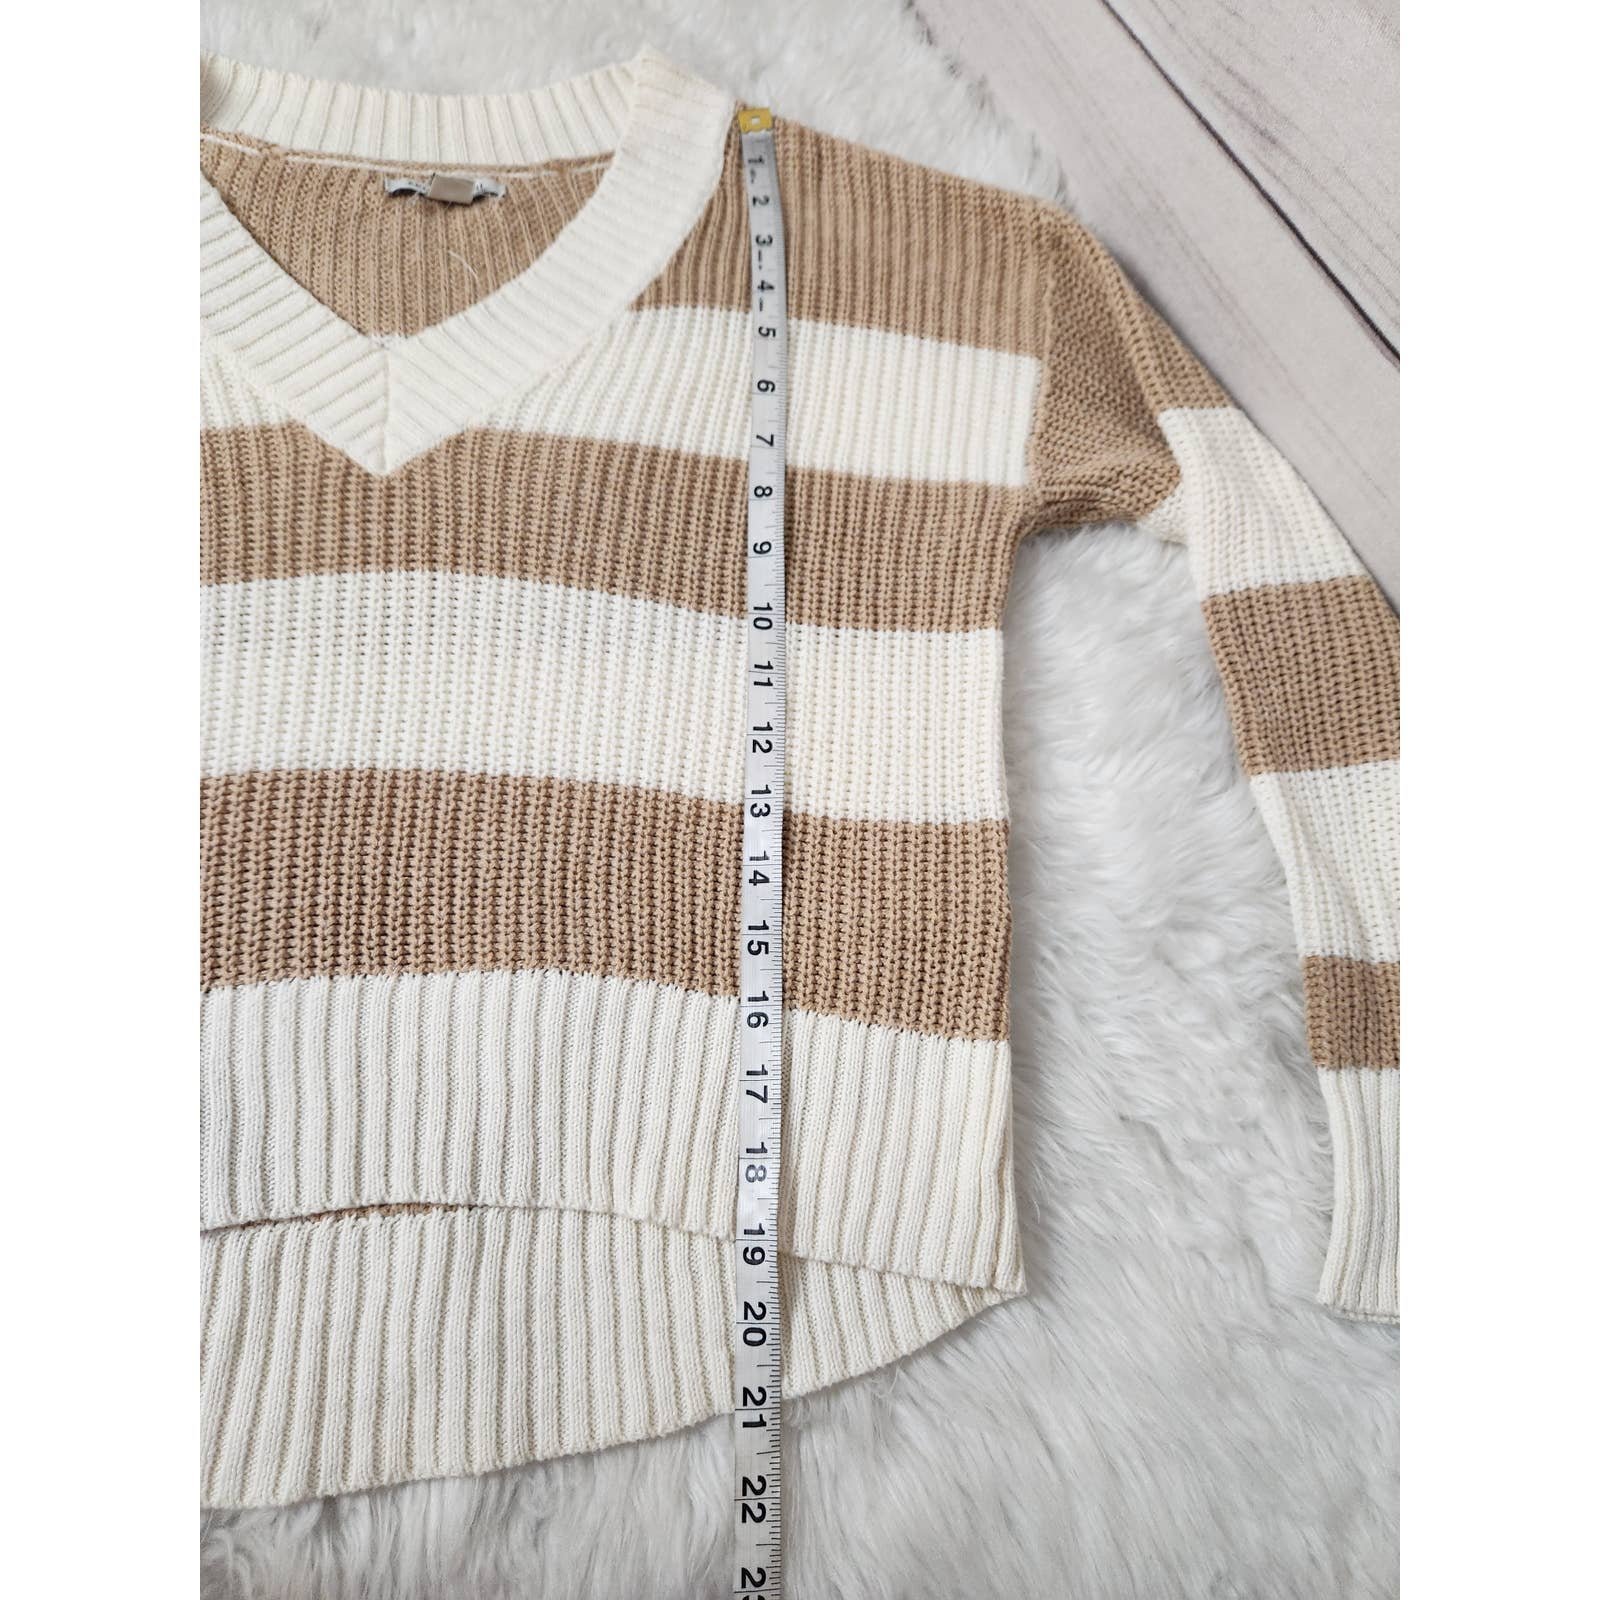 good price American Eagle Womens Sweater Knitted V Neck Striped Brown White Size XXS kbaU6xozI just for you